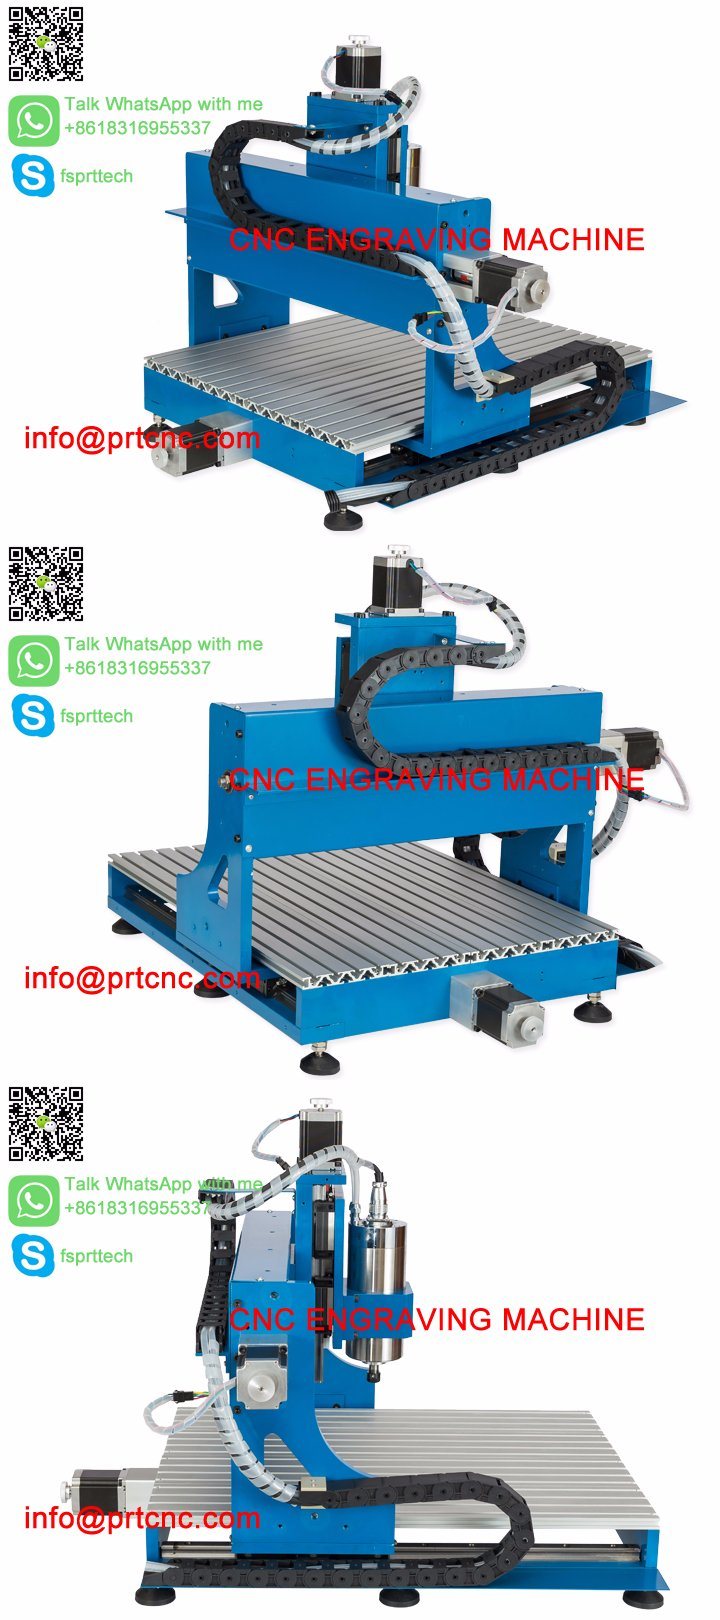 Wood CNC Router Machine for Engraving and Carving